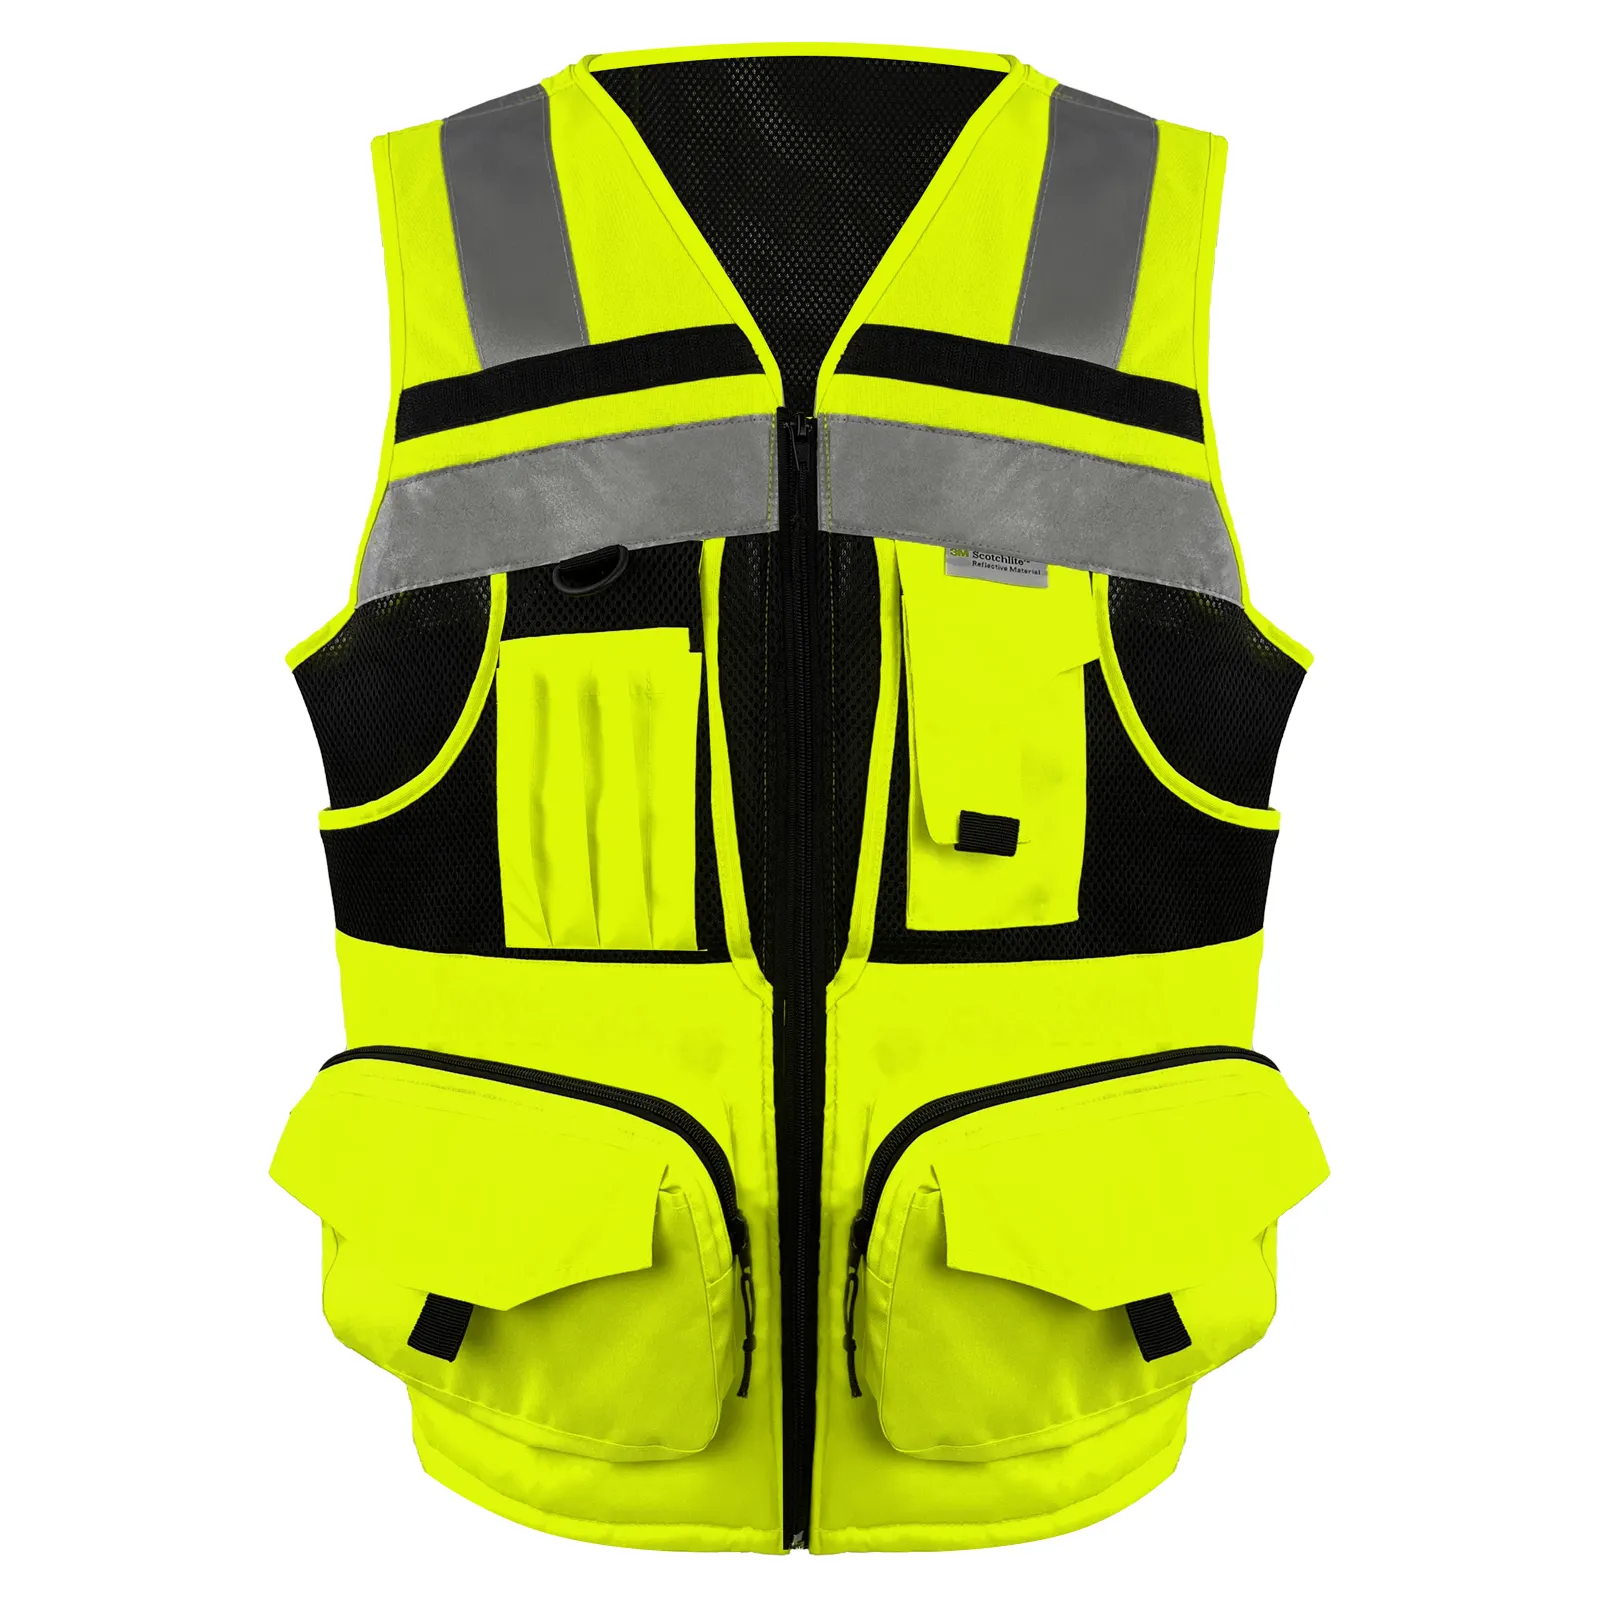 Hot Selling 3M Reflective Strip Construction Safety Vest Waterproof Oxford Fabric Breathable Mesh Multi Pockets Safety Vest